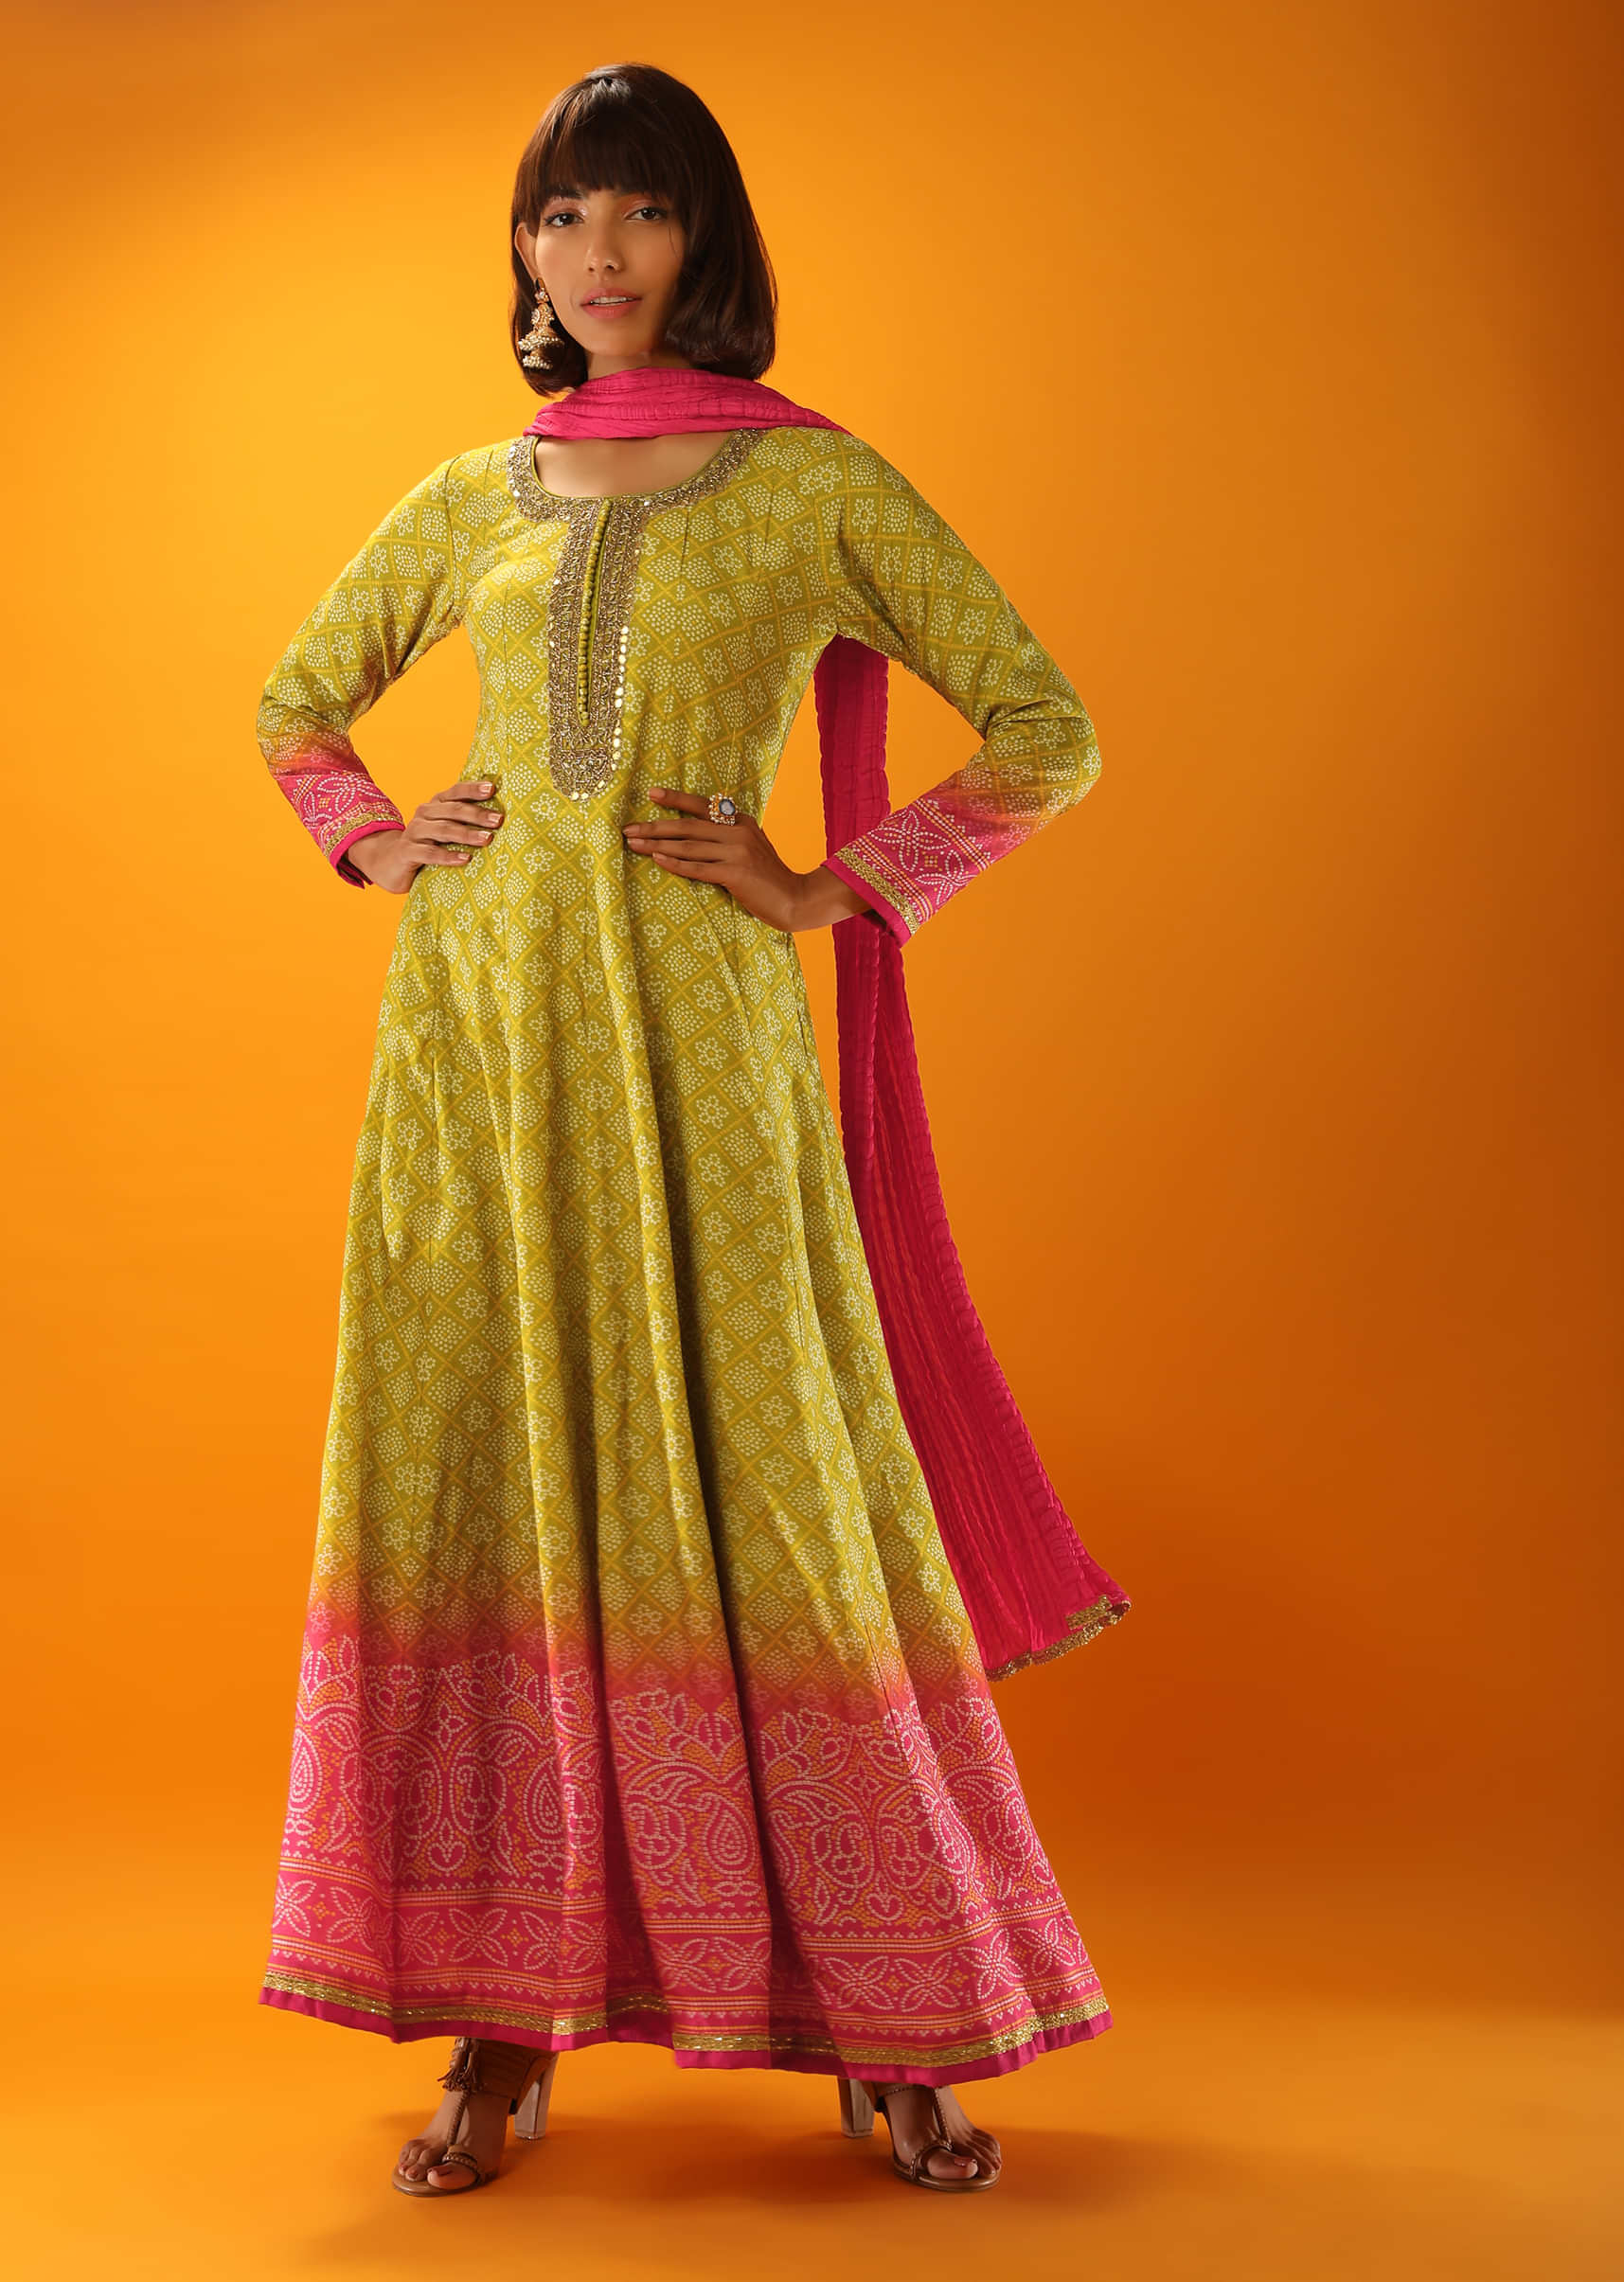 Apple Green And Fuchsia Ombre Anarkali Suit In Cotton Silk With Bandhani Design And Gotta Patti Embroidered Placket  